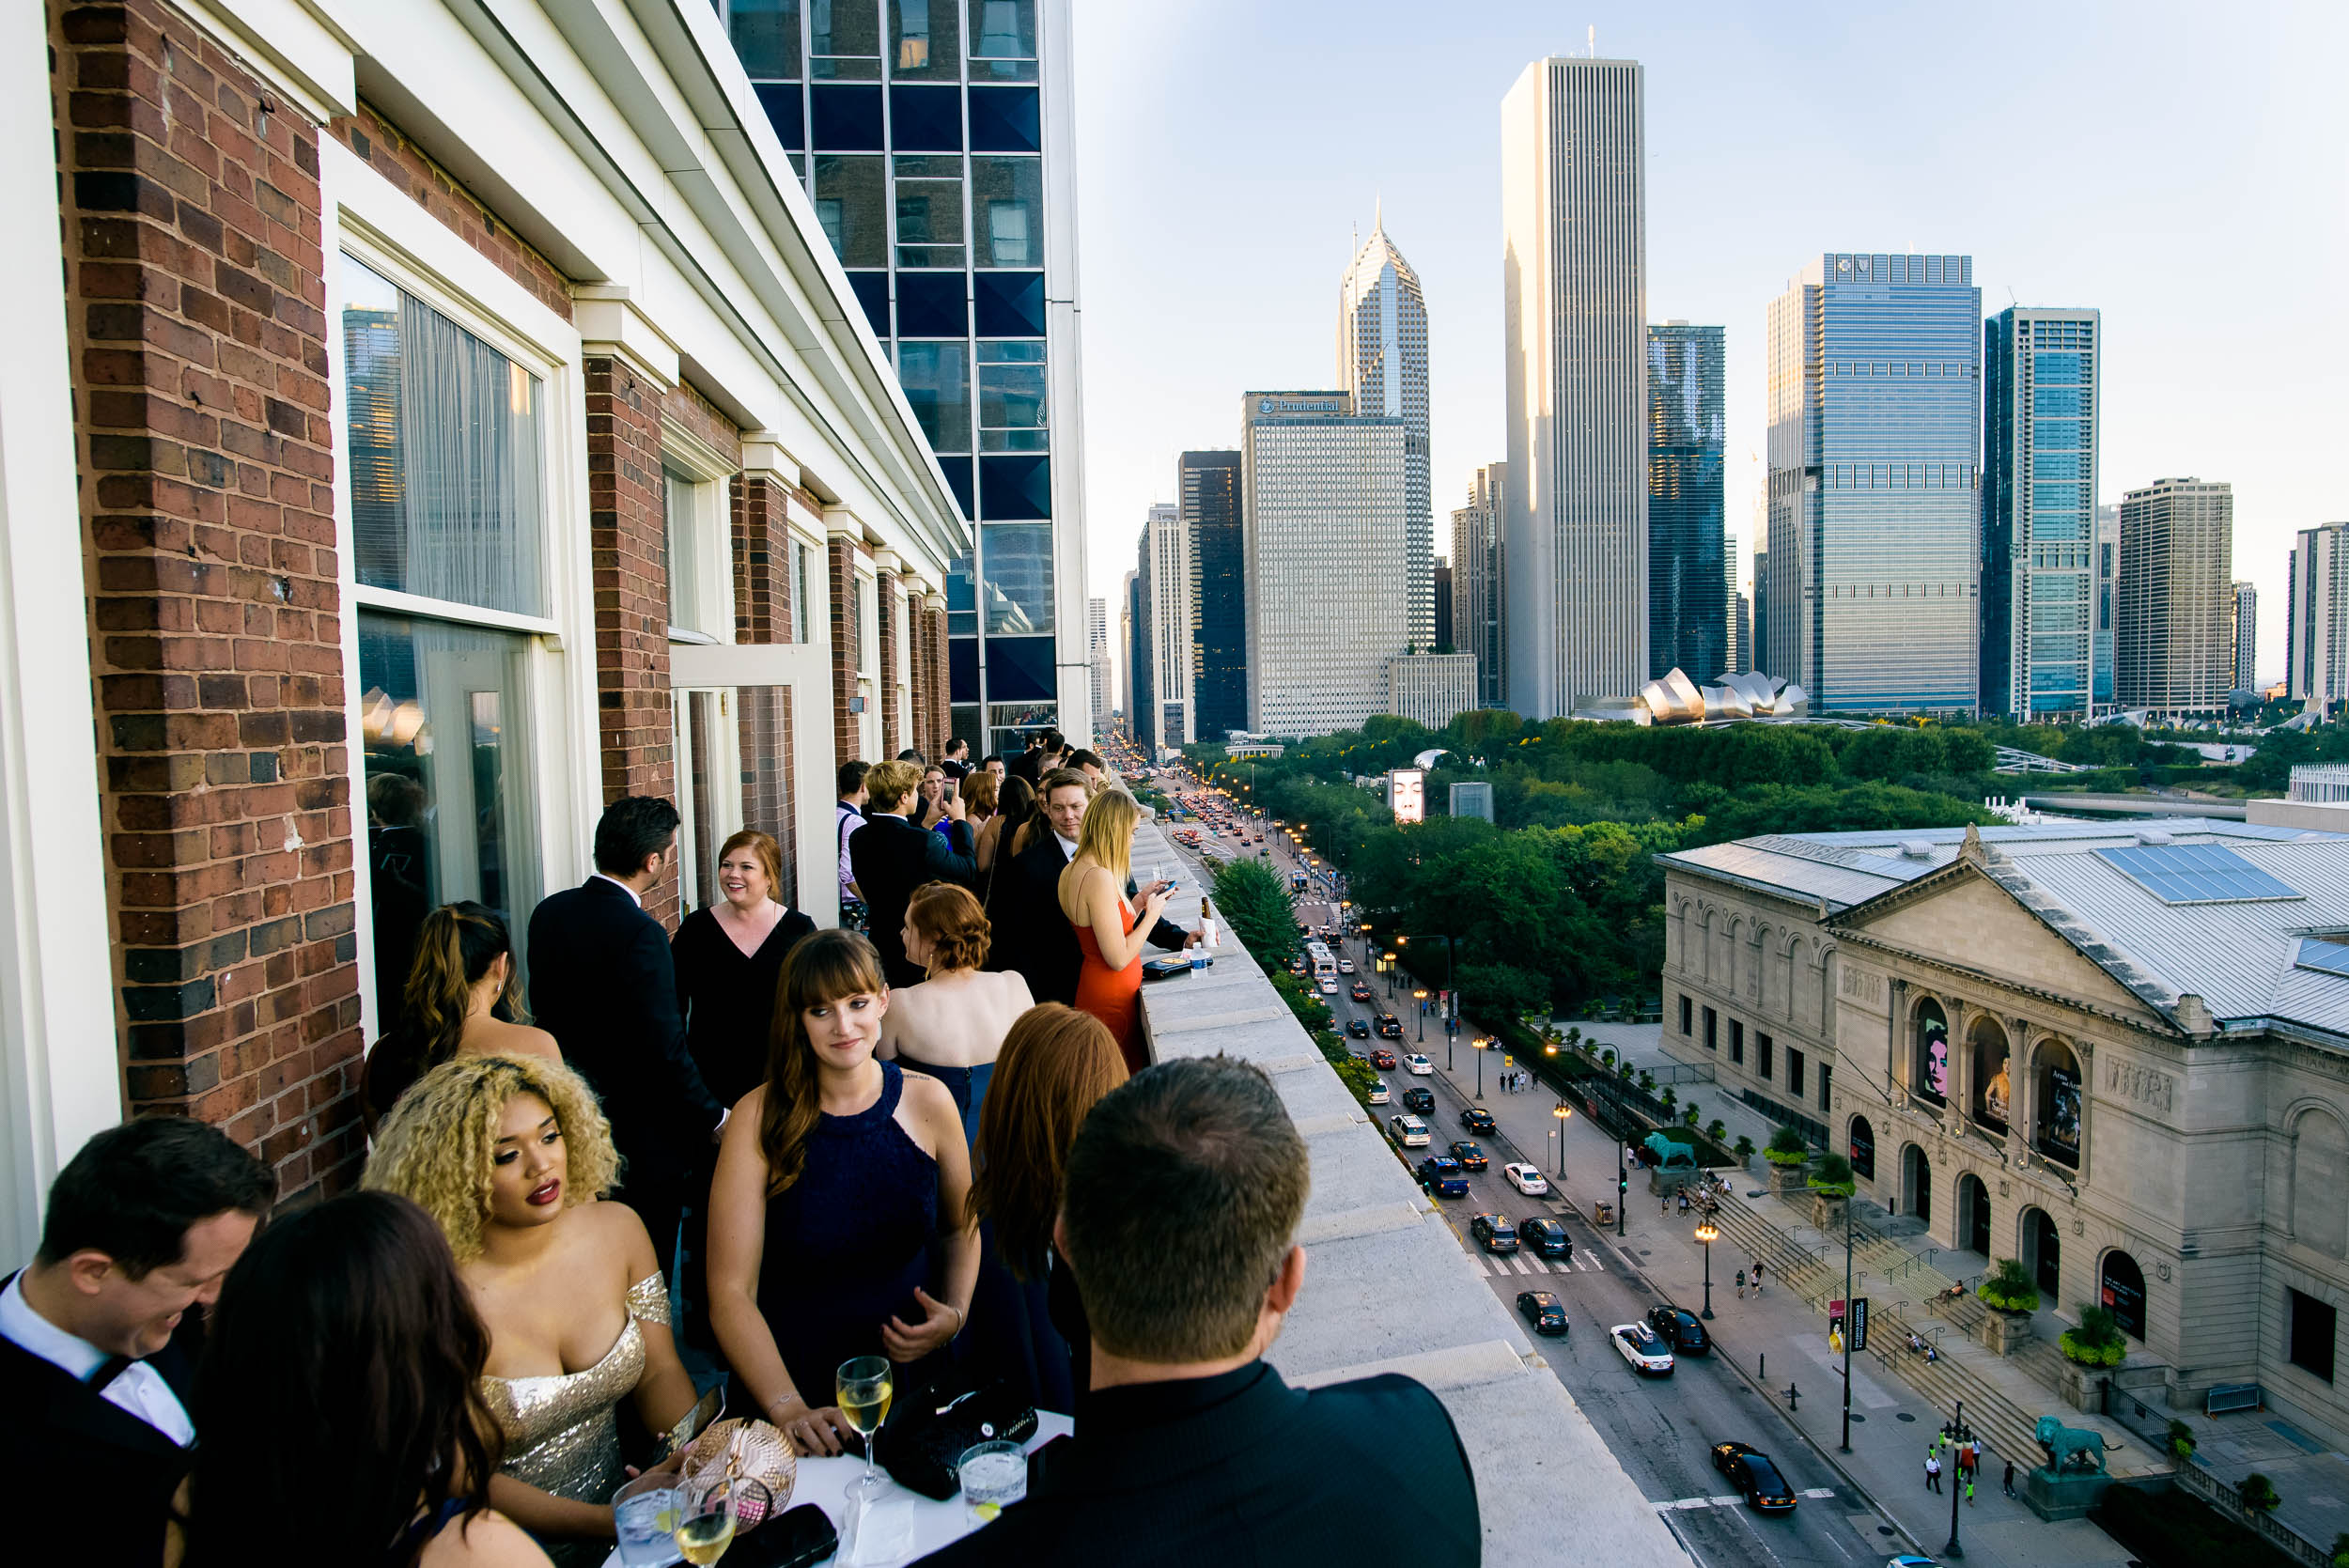 Chicago city skyline at luxurious fall wedding at the Chicago Symphony Center captured by J. Brown Photography. See more wedding ideas at jbrownphotography.com!